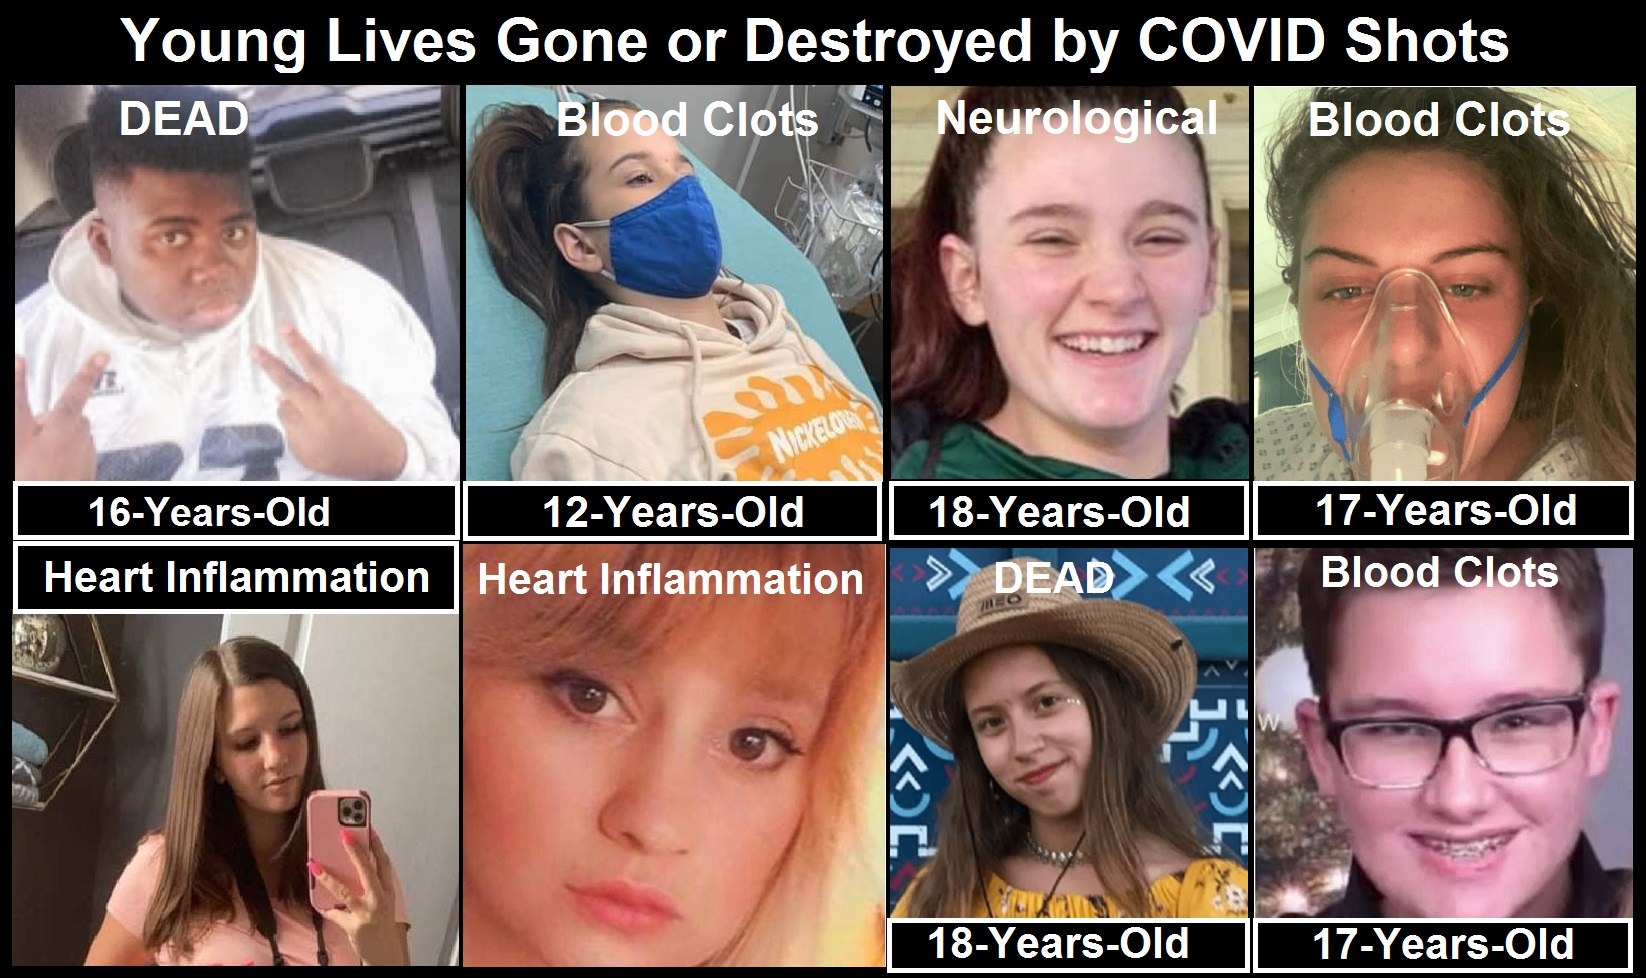 Children dying from covid shots